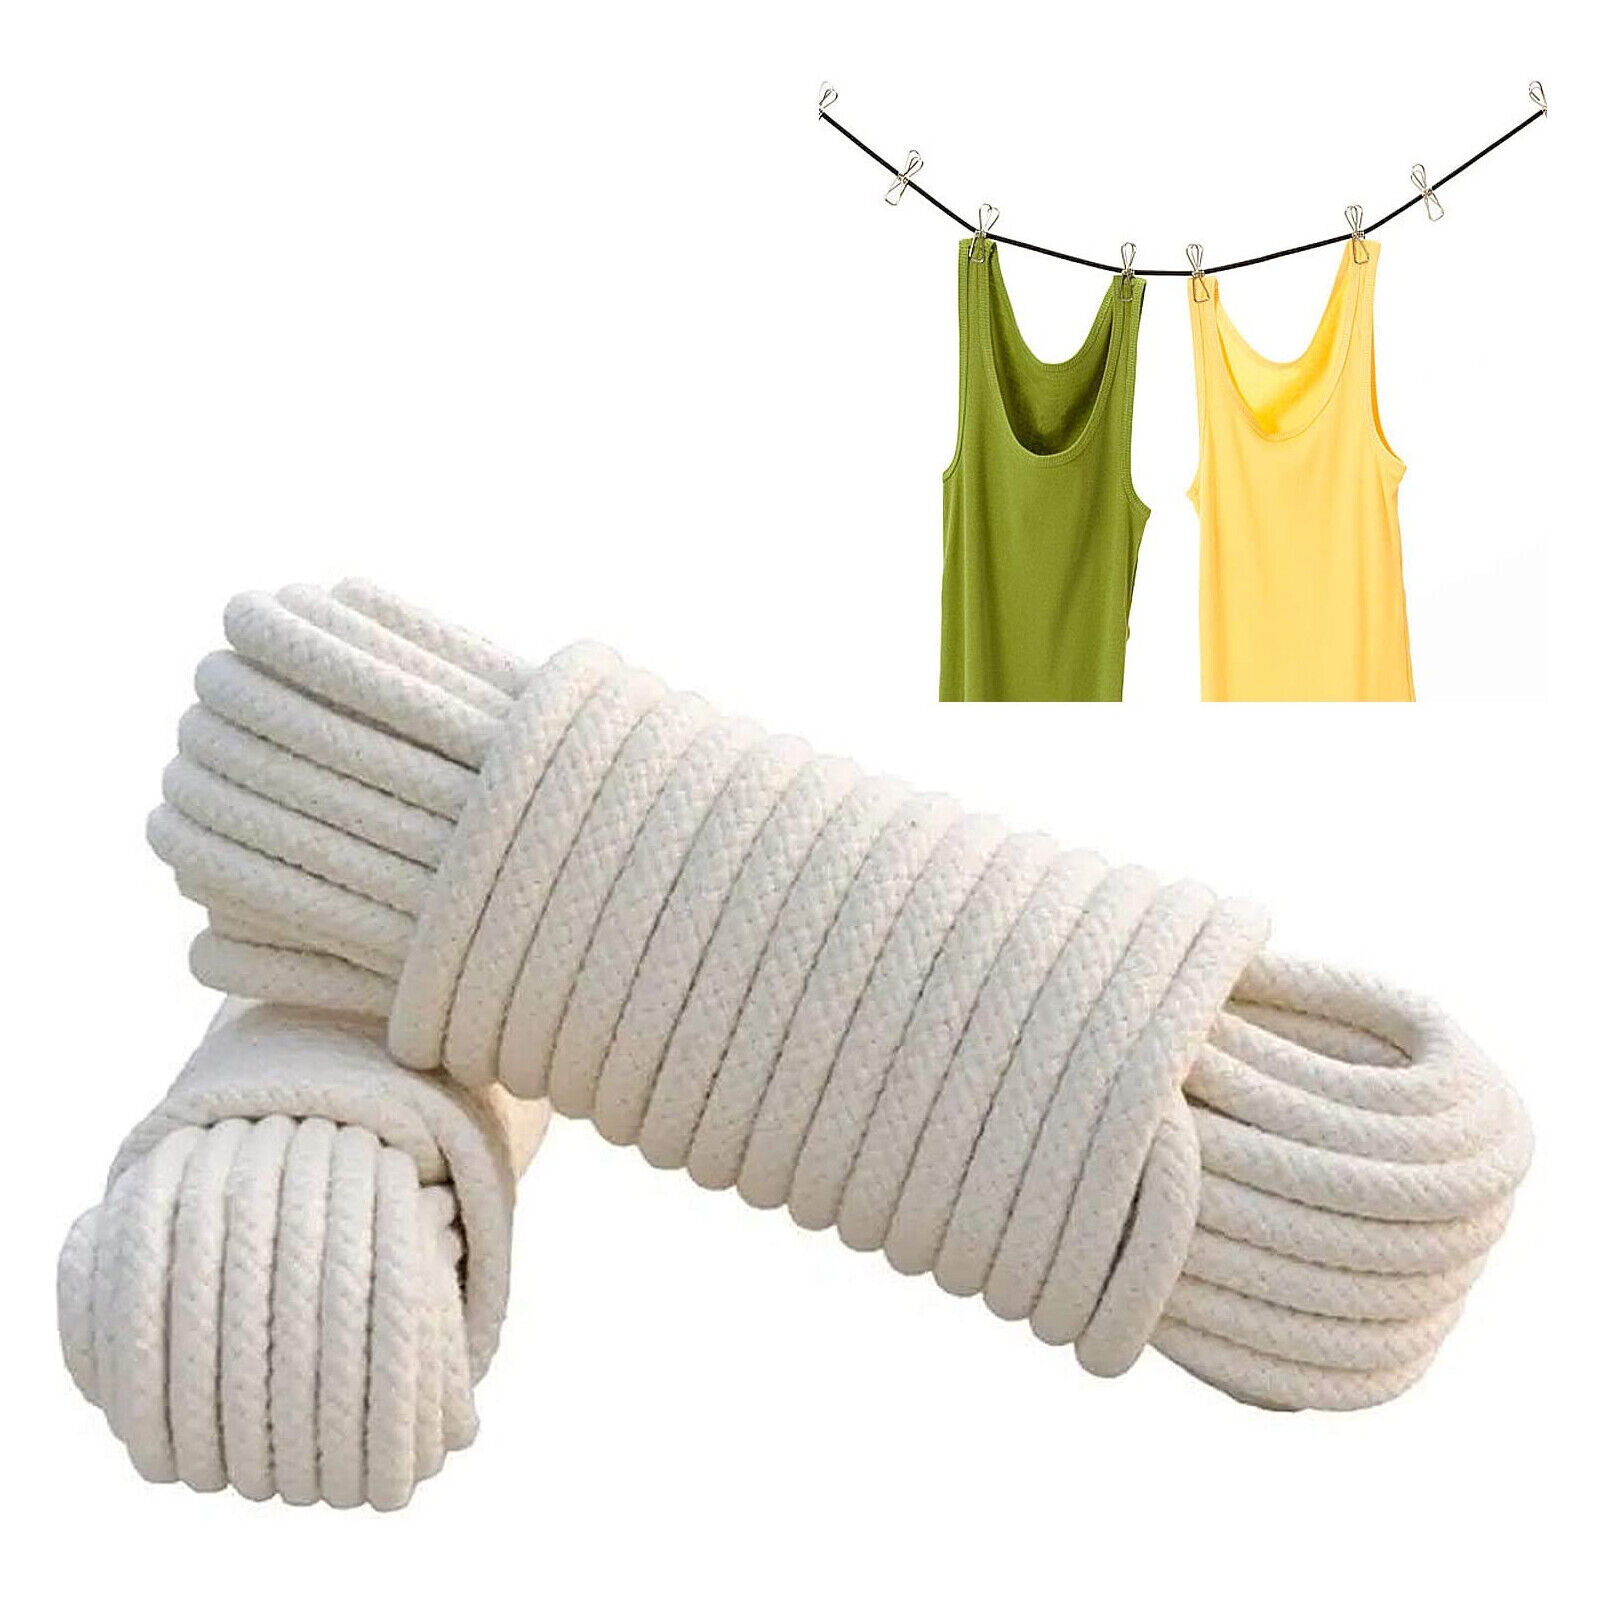 25 Meter Washing Line Cotton Rope Traditional Strong Washing Clothes Dryer Line Twine Hank Polley Jute